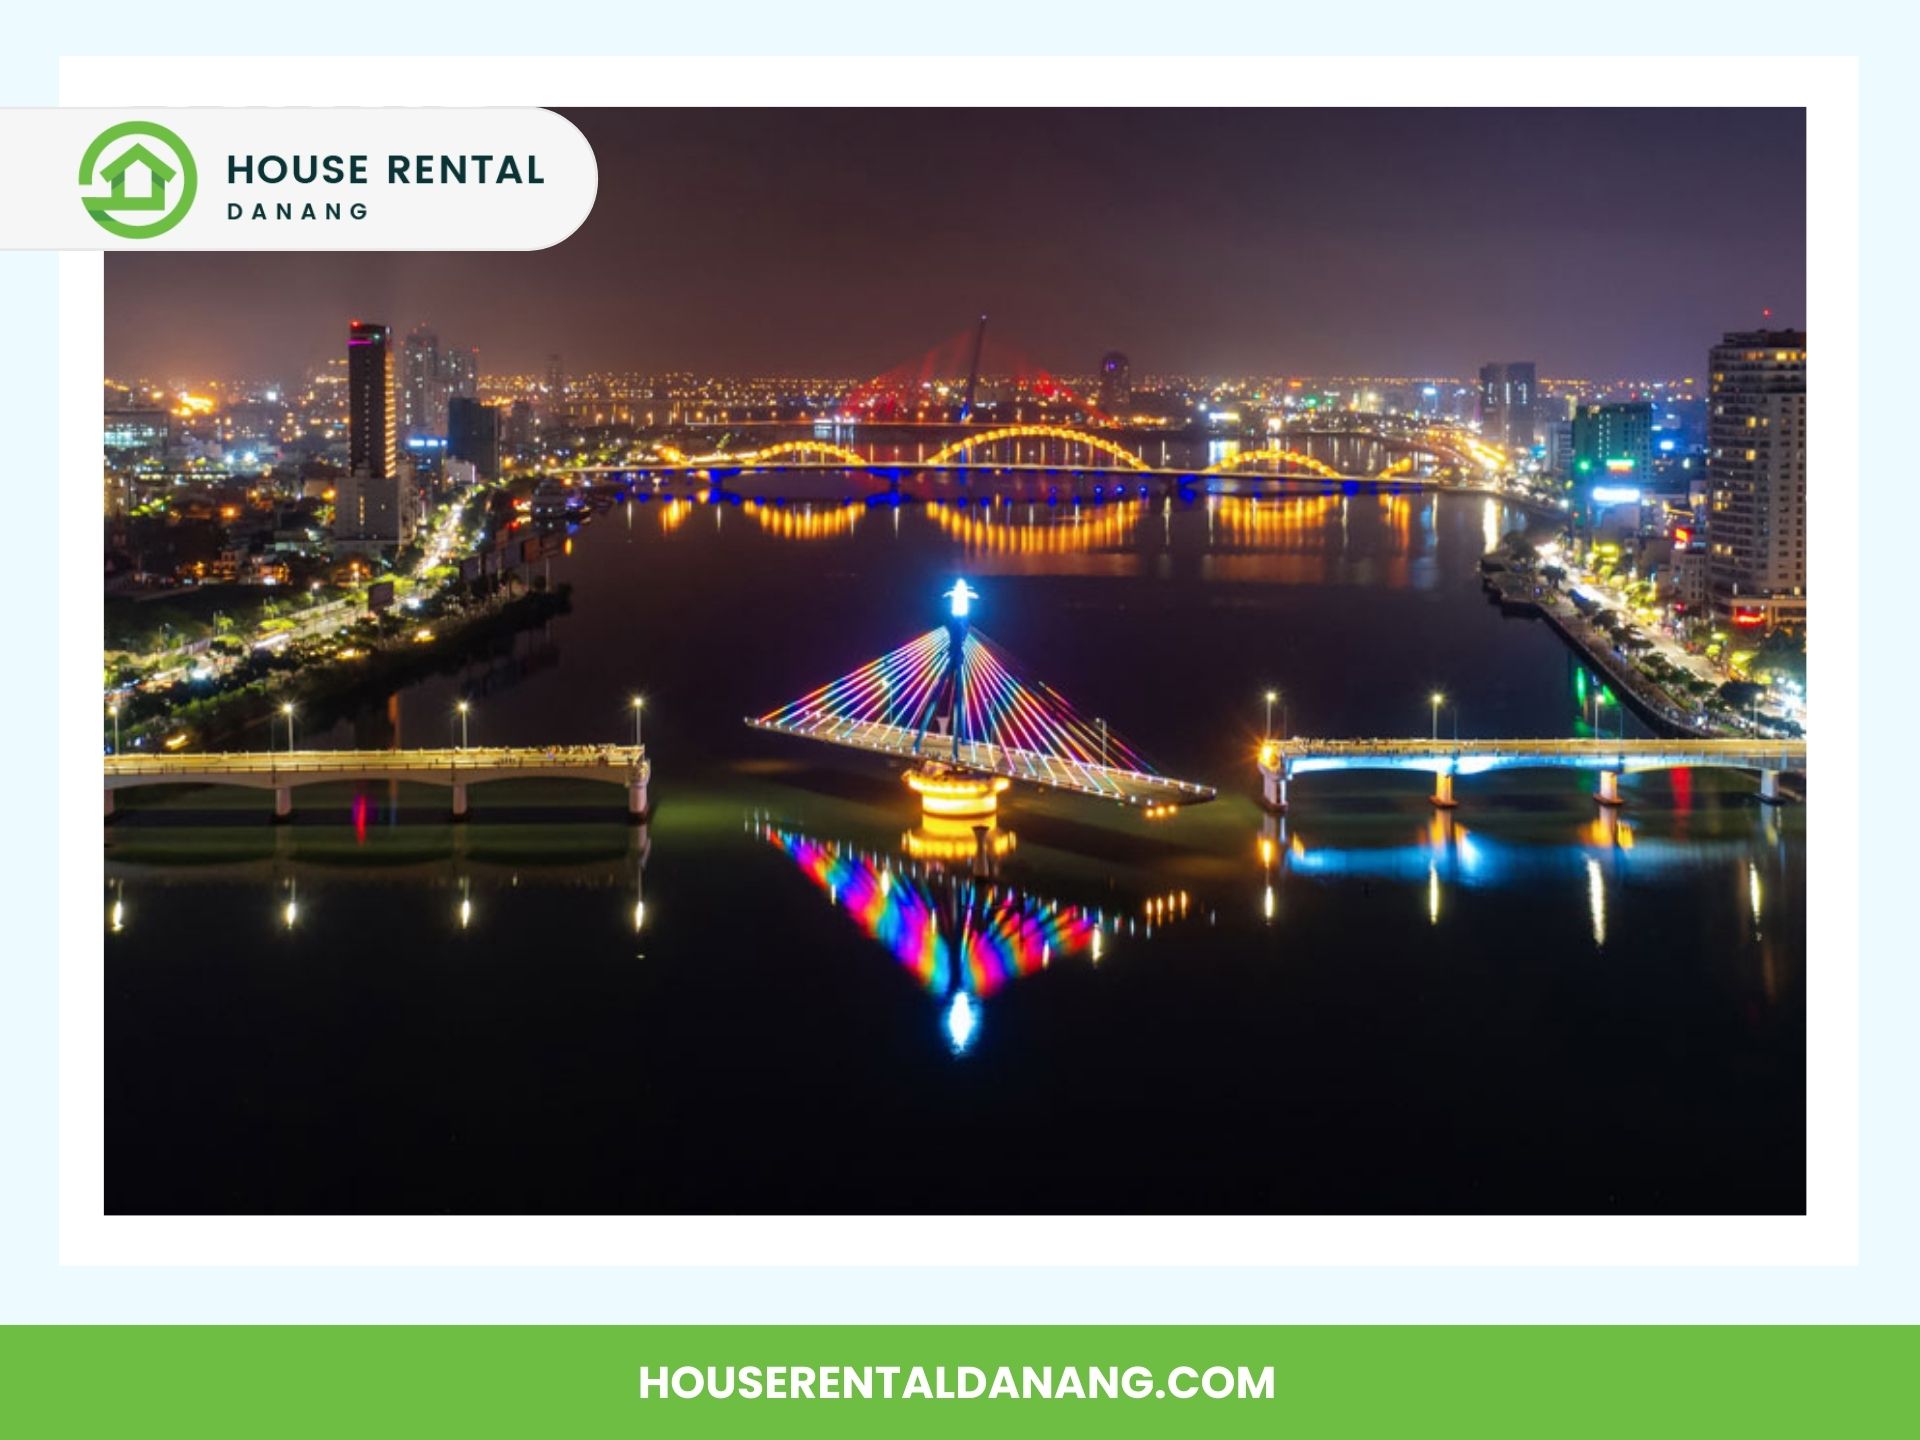 A nighttime view of Danang City featuring the illuminated Han River Bridge over a river, vibrant city lights, and a colorfully lit boat. Text: "HOUSE RENTAL DANANG" with a website URL at the bottom.